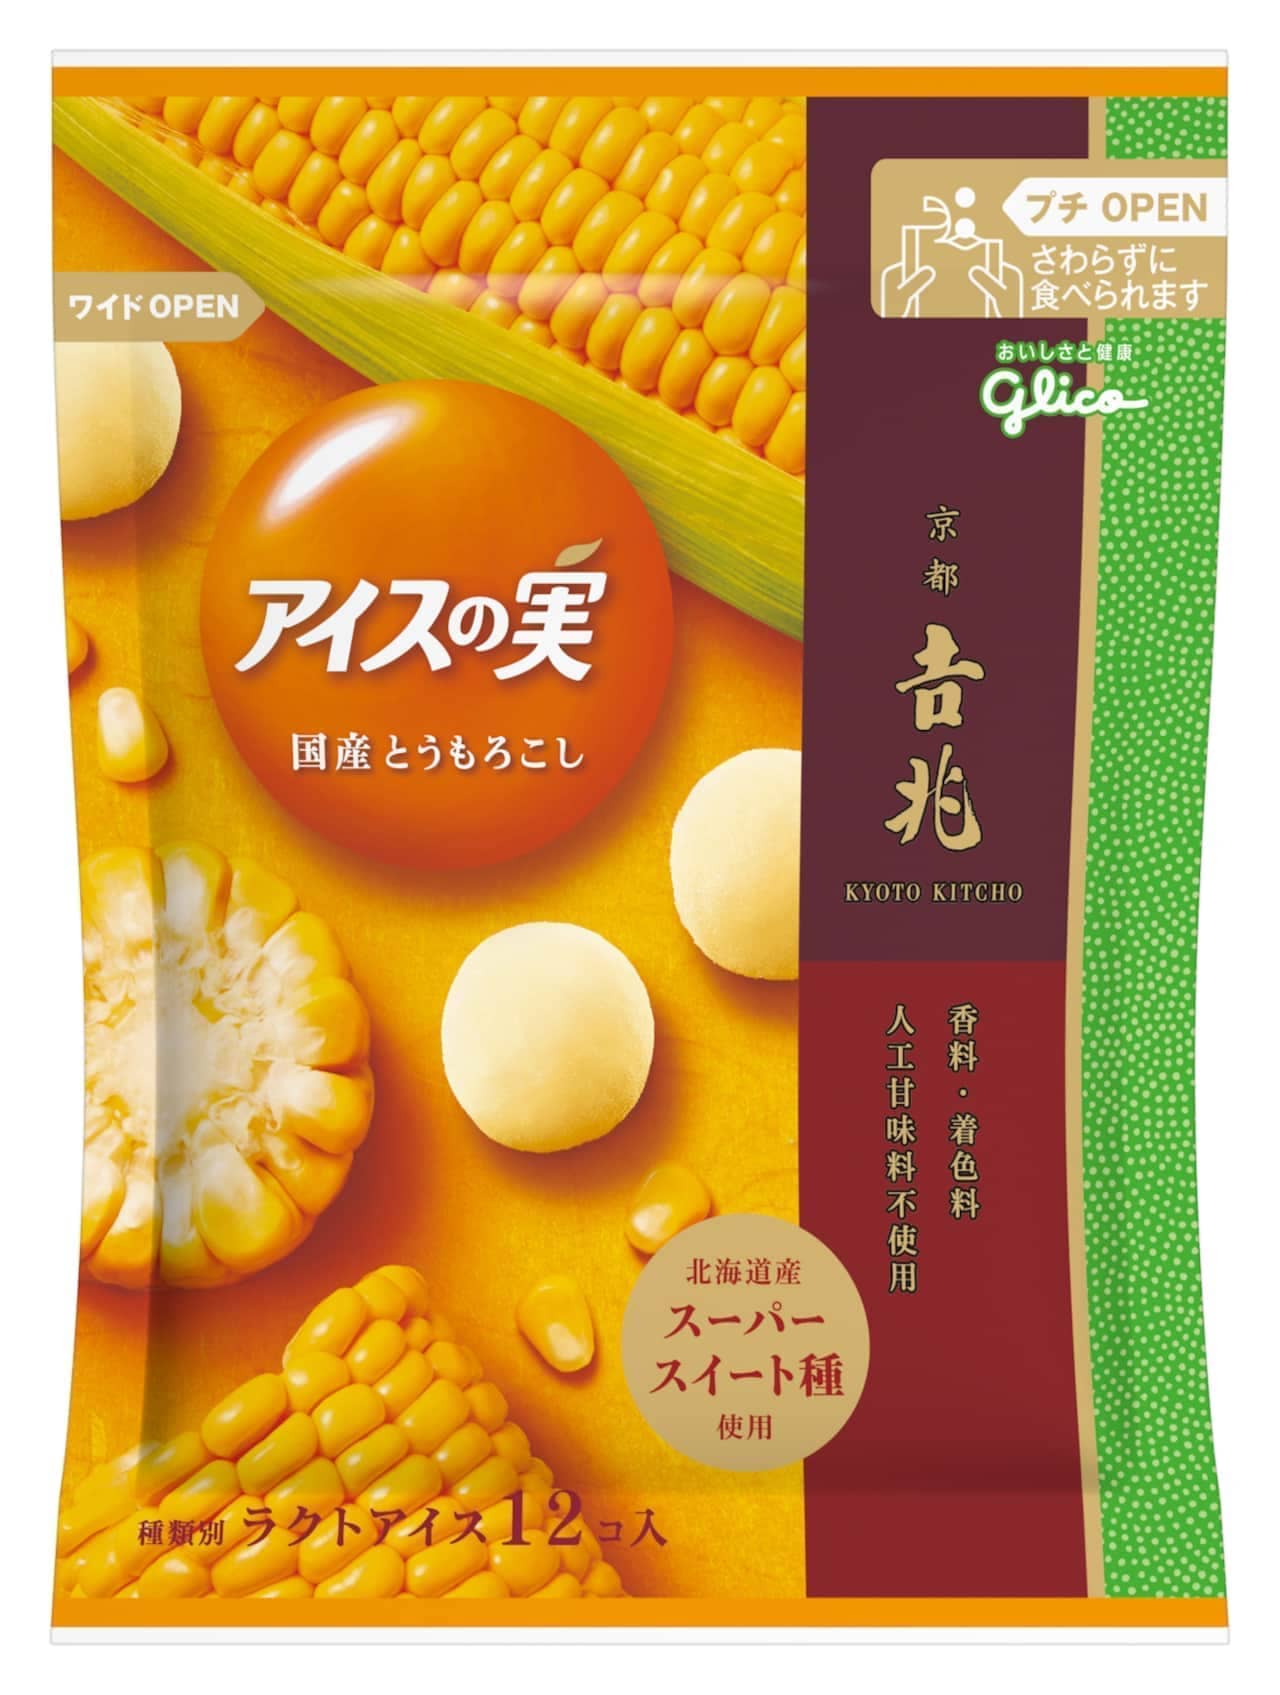 Glico "Ice Fruit [Domestic Vegetable Series]"